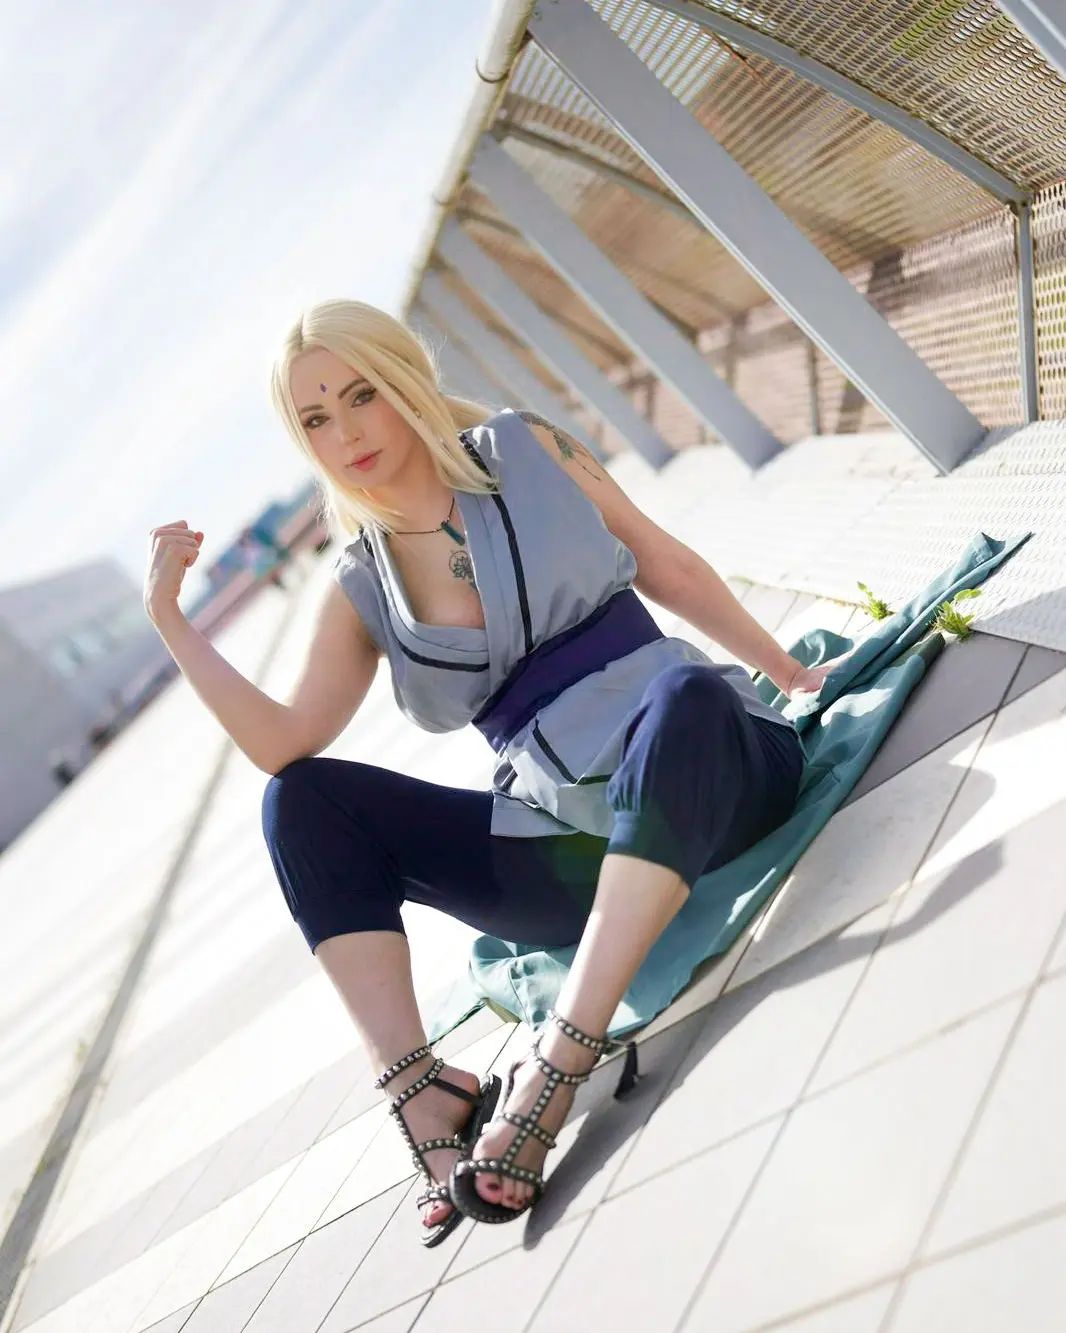 «People become stronger because they have things they cannot forget. That's what you call growth.»
—Tsunade 💚
Against all expectations I brought this cosplay to the con and I'm very happy with how it turned out, next time I'll improve it but I'm very happy with the photos taken today! 🥰 
Thank you all for the company and the good time spent together~ 💗🌸

#tsunade #tsunadesenju #tsunadesama #tsunadecosplay #cosplay #naruto #narutocosplay #anime #manga #cosplayer #tsunadecosplay